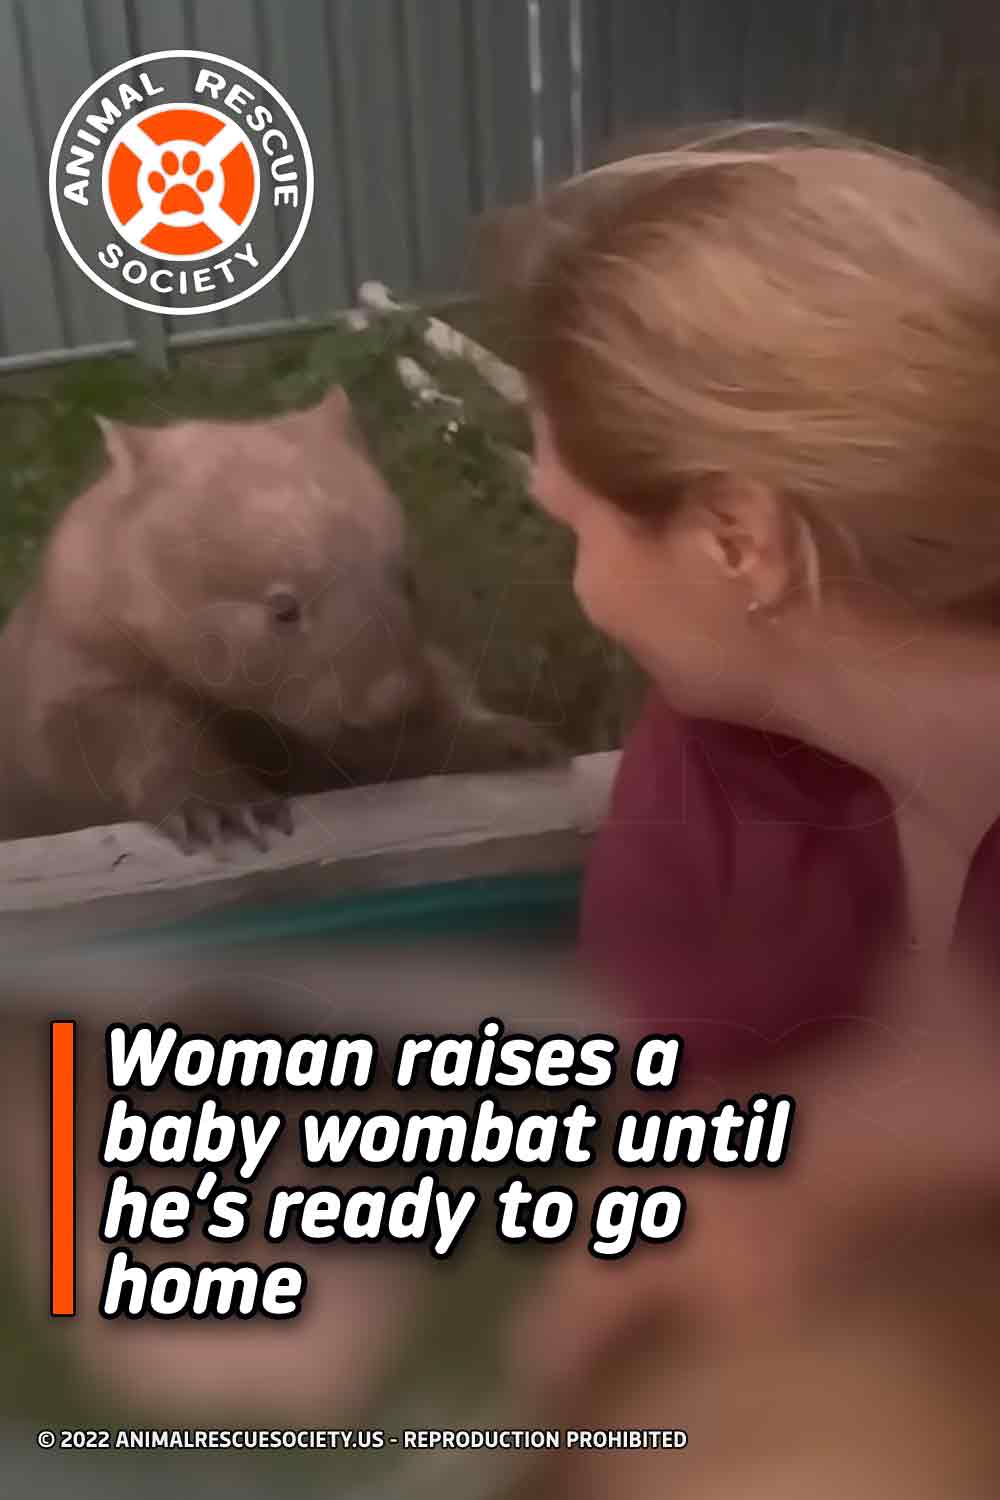 Woman raises a baby wombat until he’s ready to go home